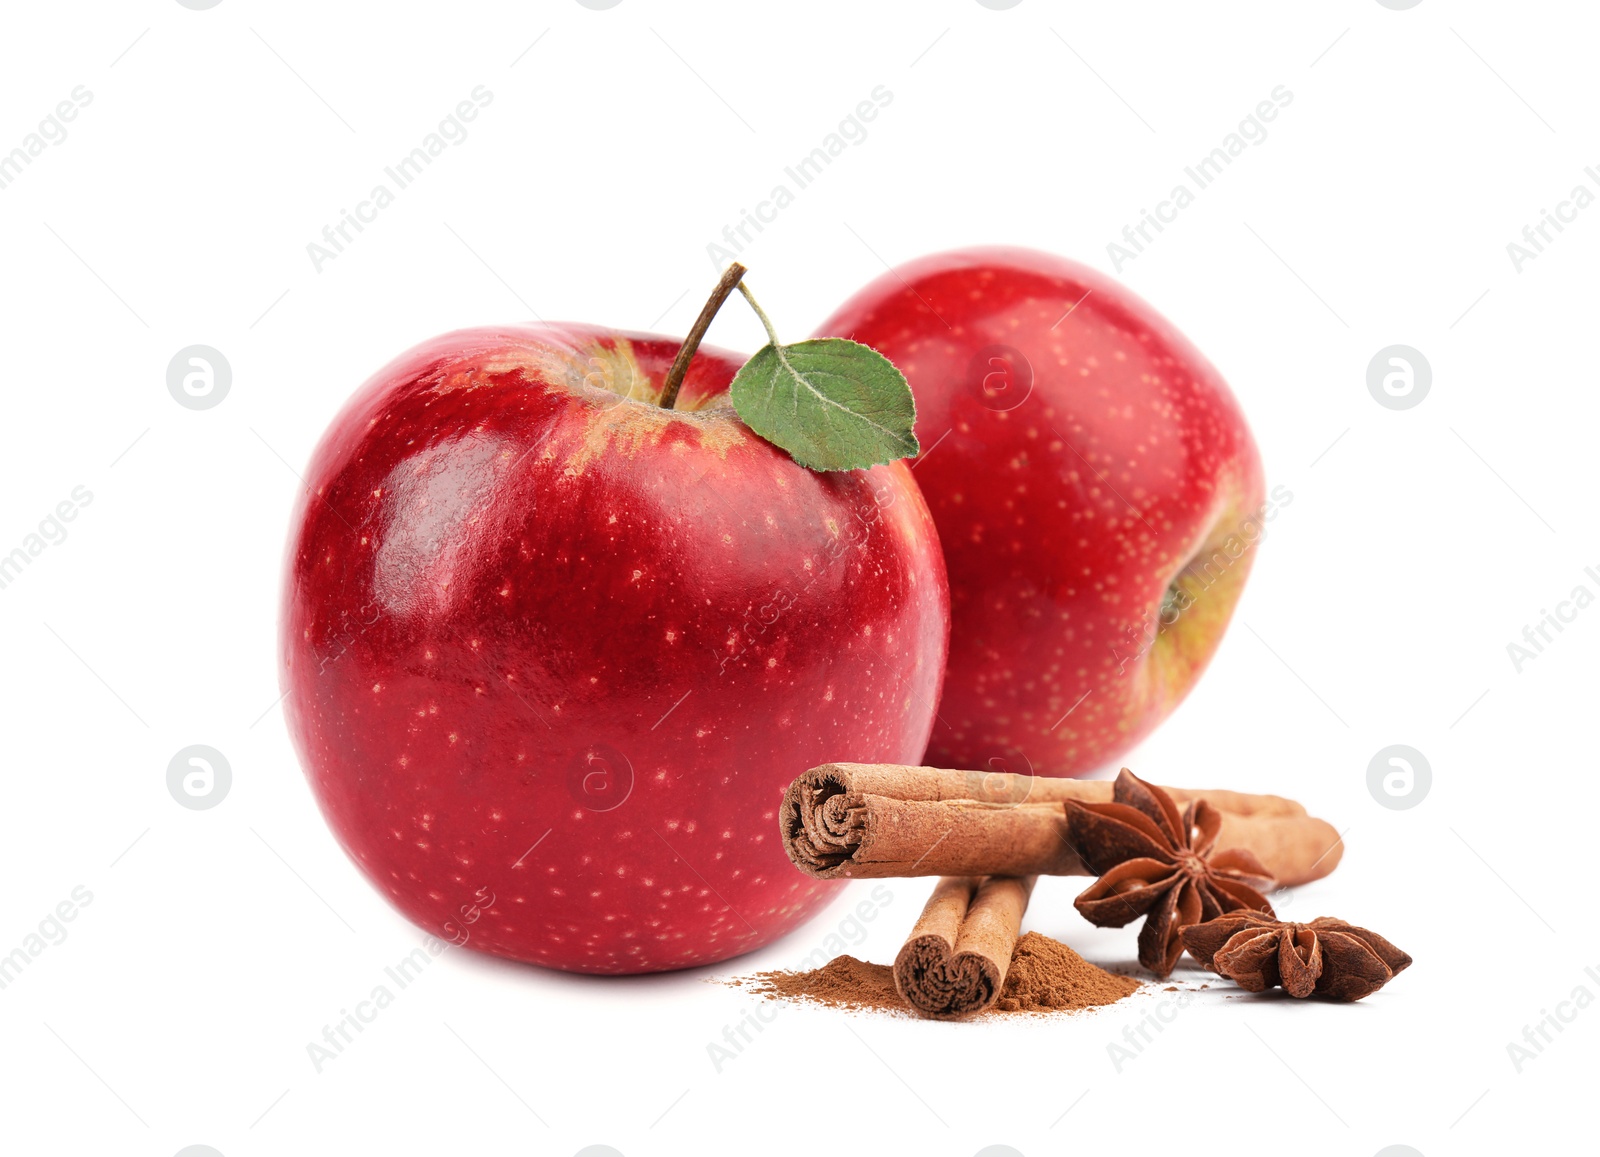 Image of Aromatic cinnamon sticks, anise stars and red apples isolated on white